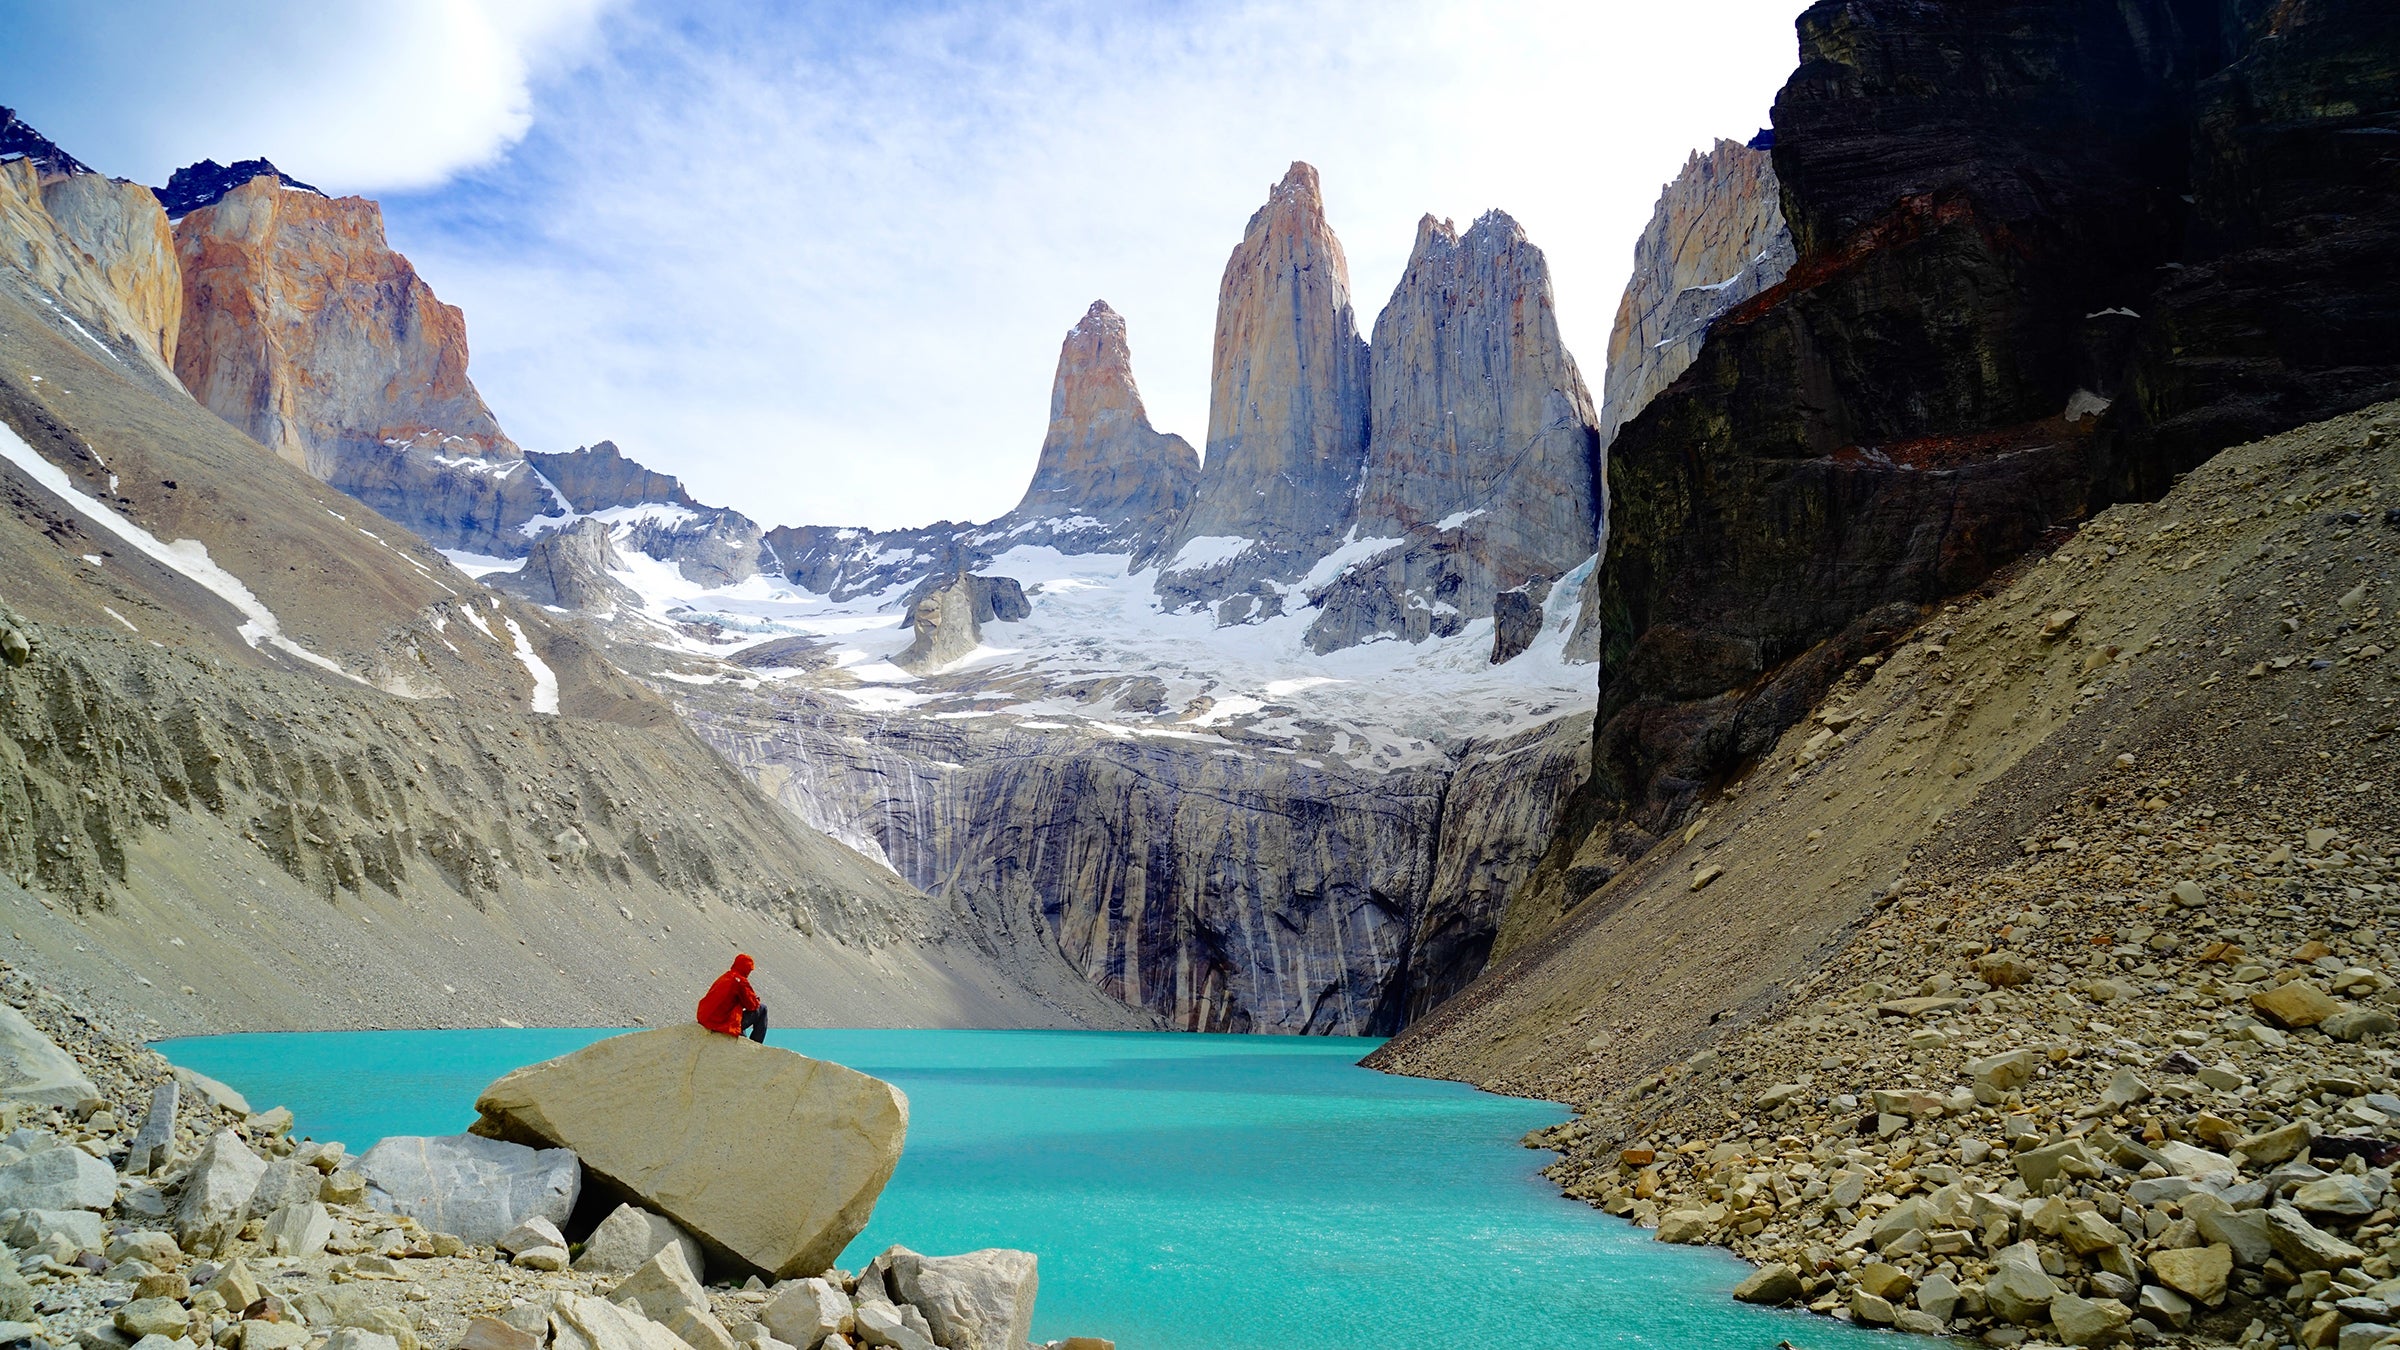 Torres Del Paine, The Best National Park in the World?